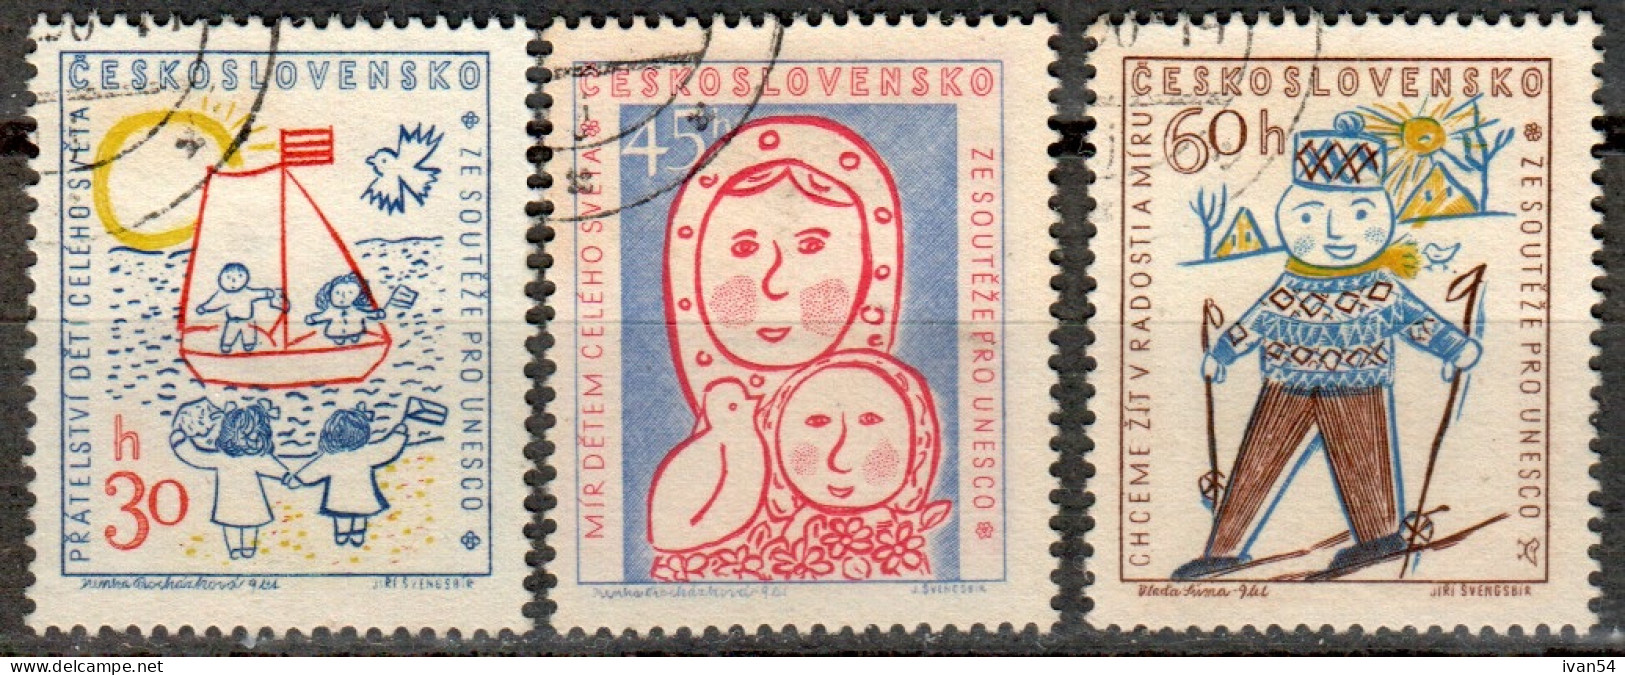 TCHECHOSLOVAKIA: 989-91 (0) – UNESCO - 1958 - Used Stamps